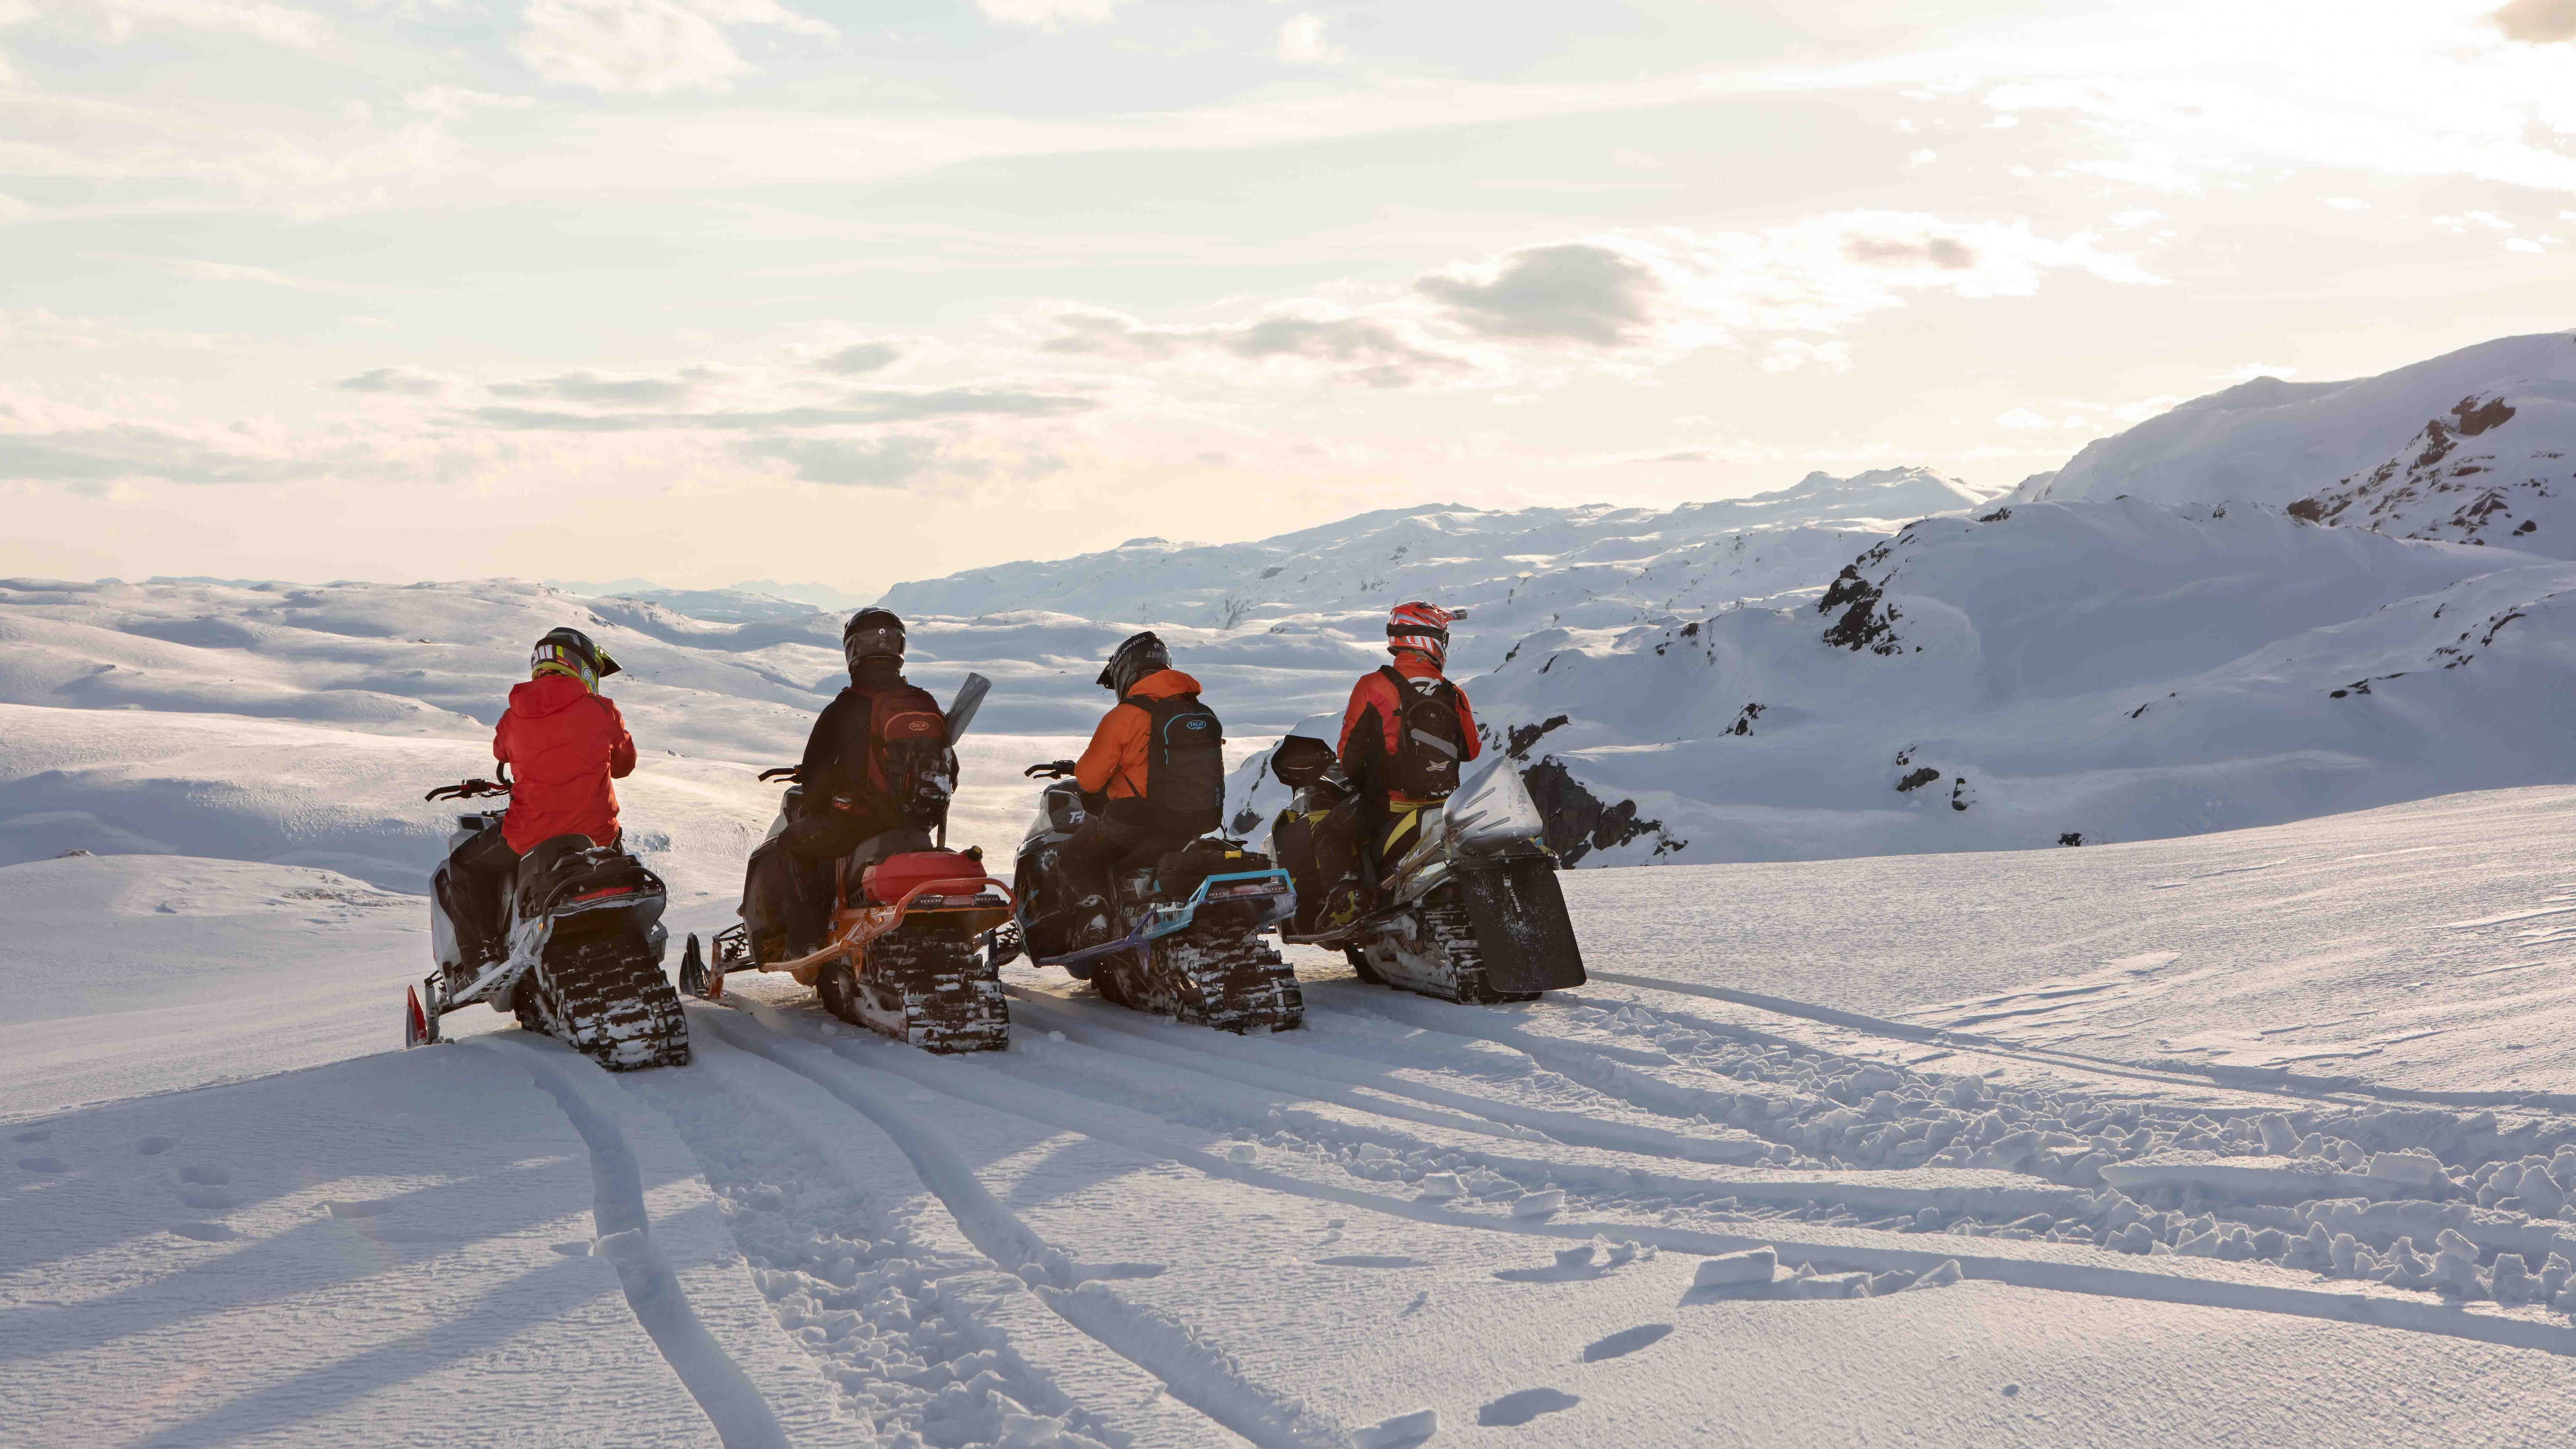 Ski-Doo snowmobiles parked in mountains with riders